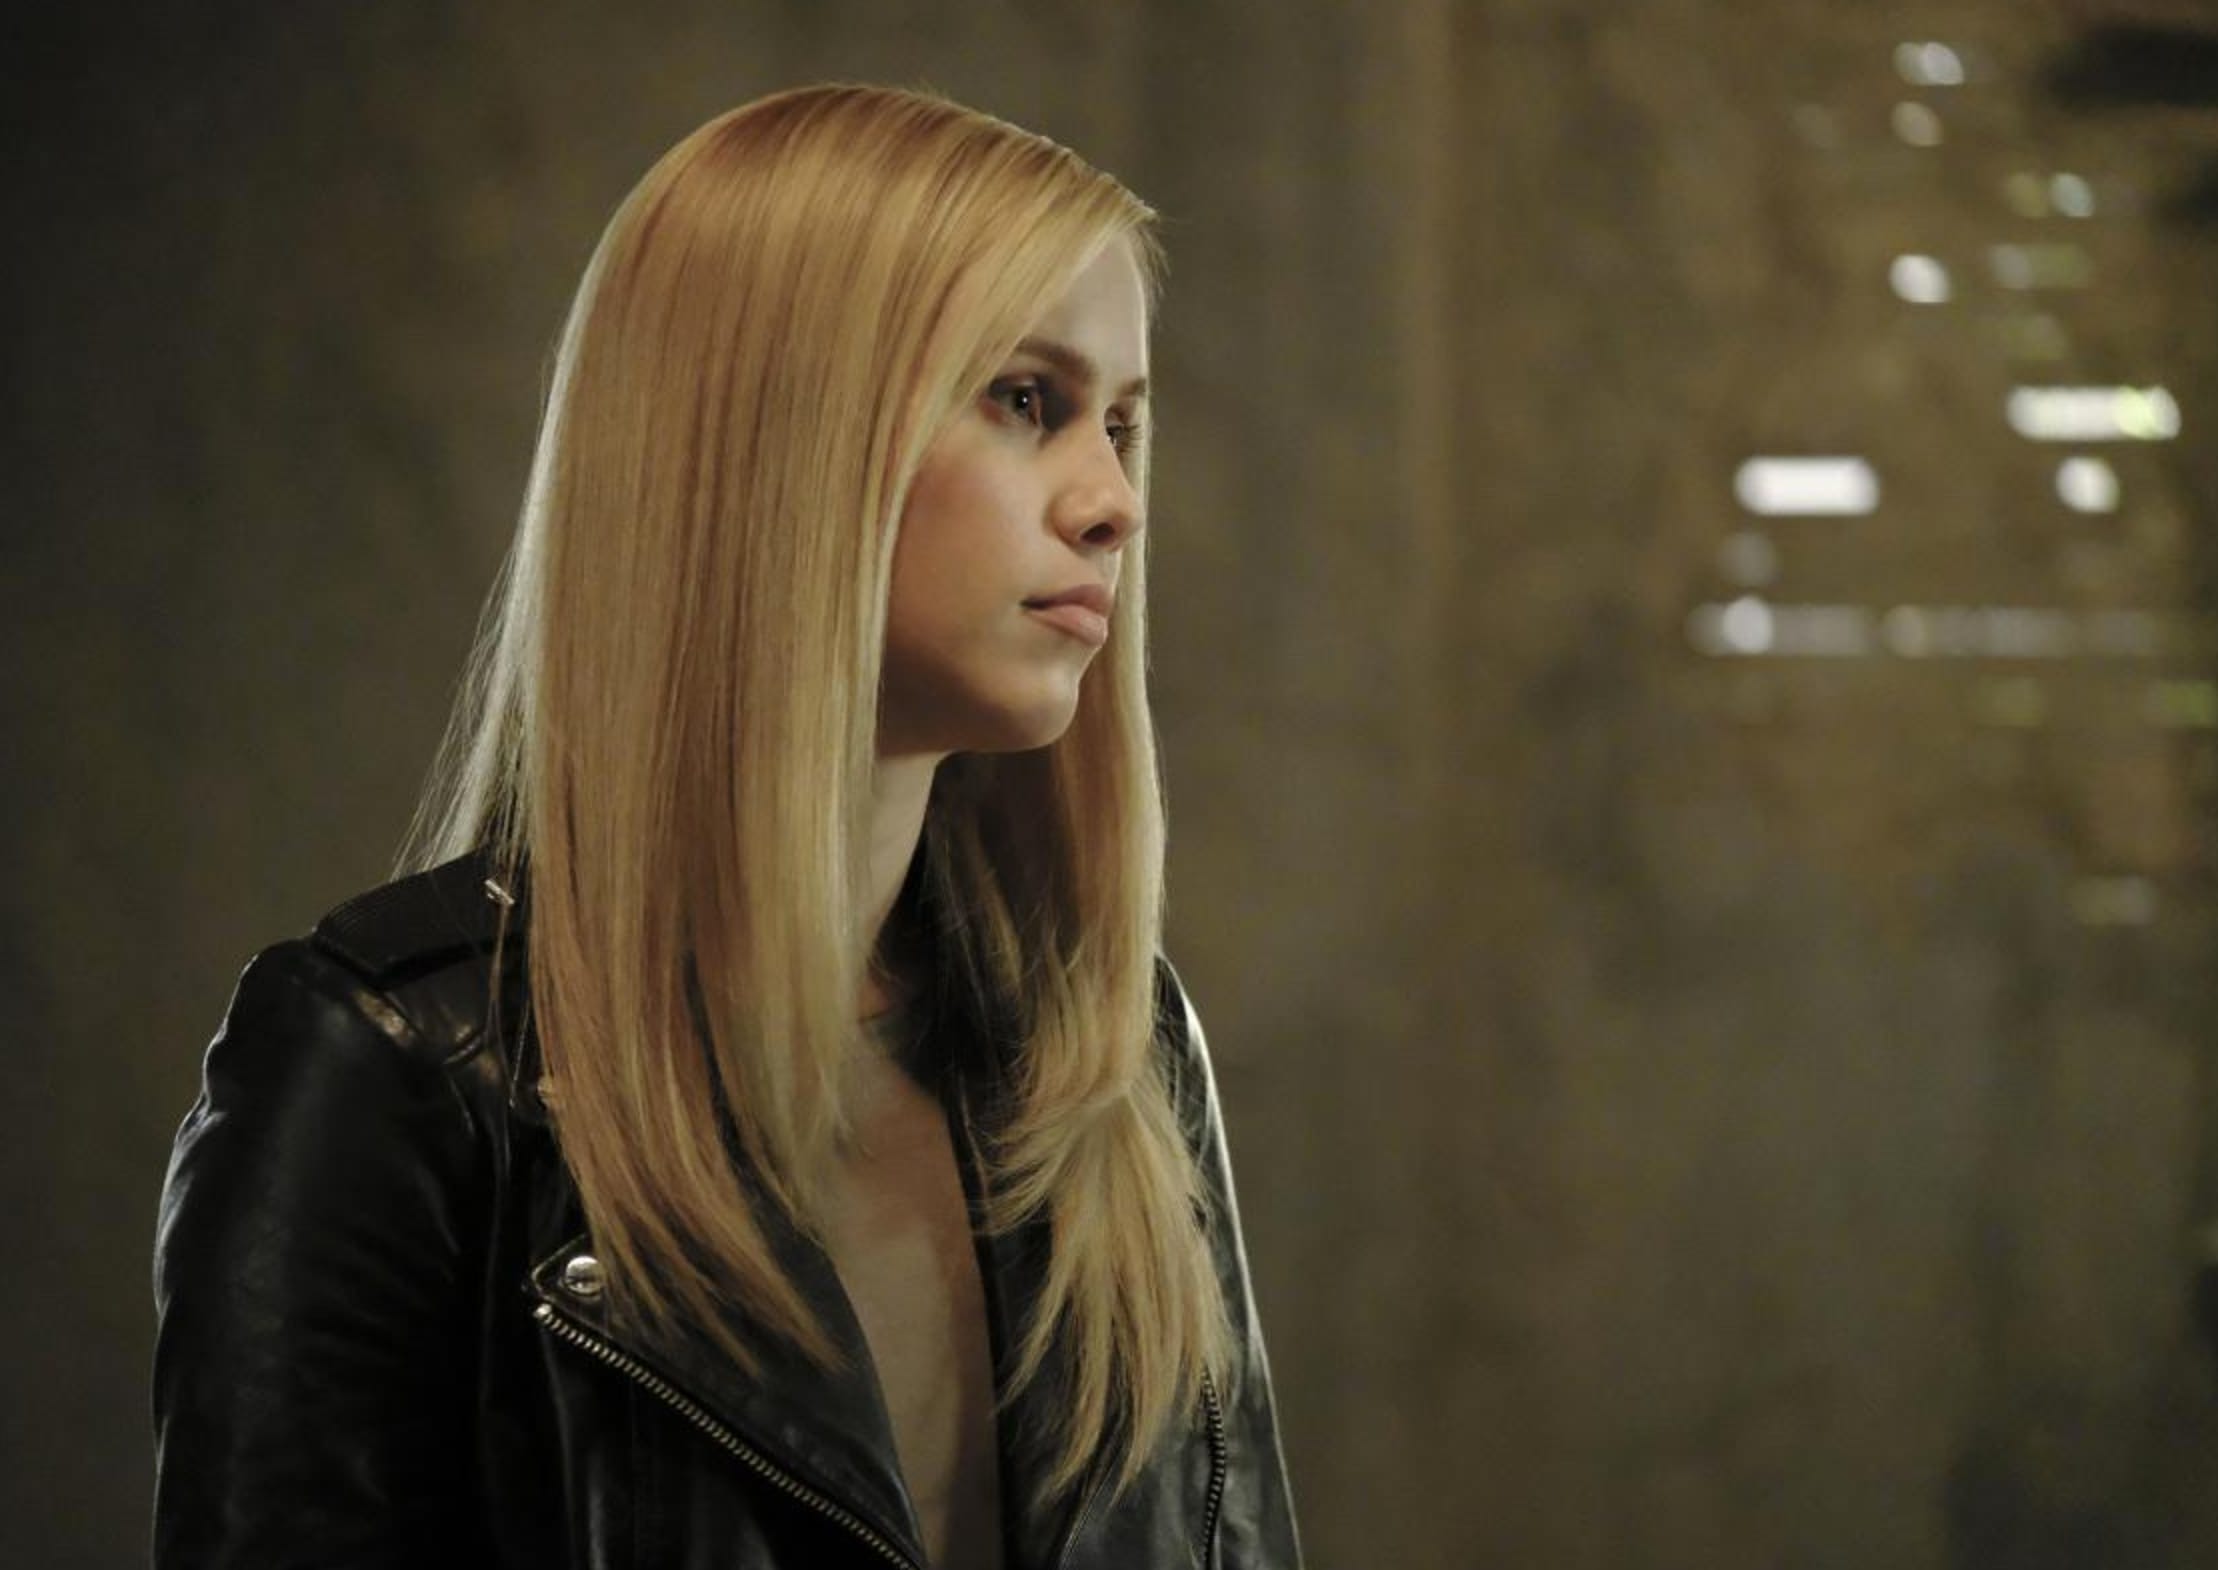 Rebekah Mikaelson — Kol: I was dead for ages, Davina. And when I